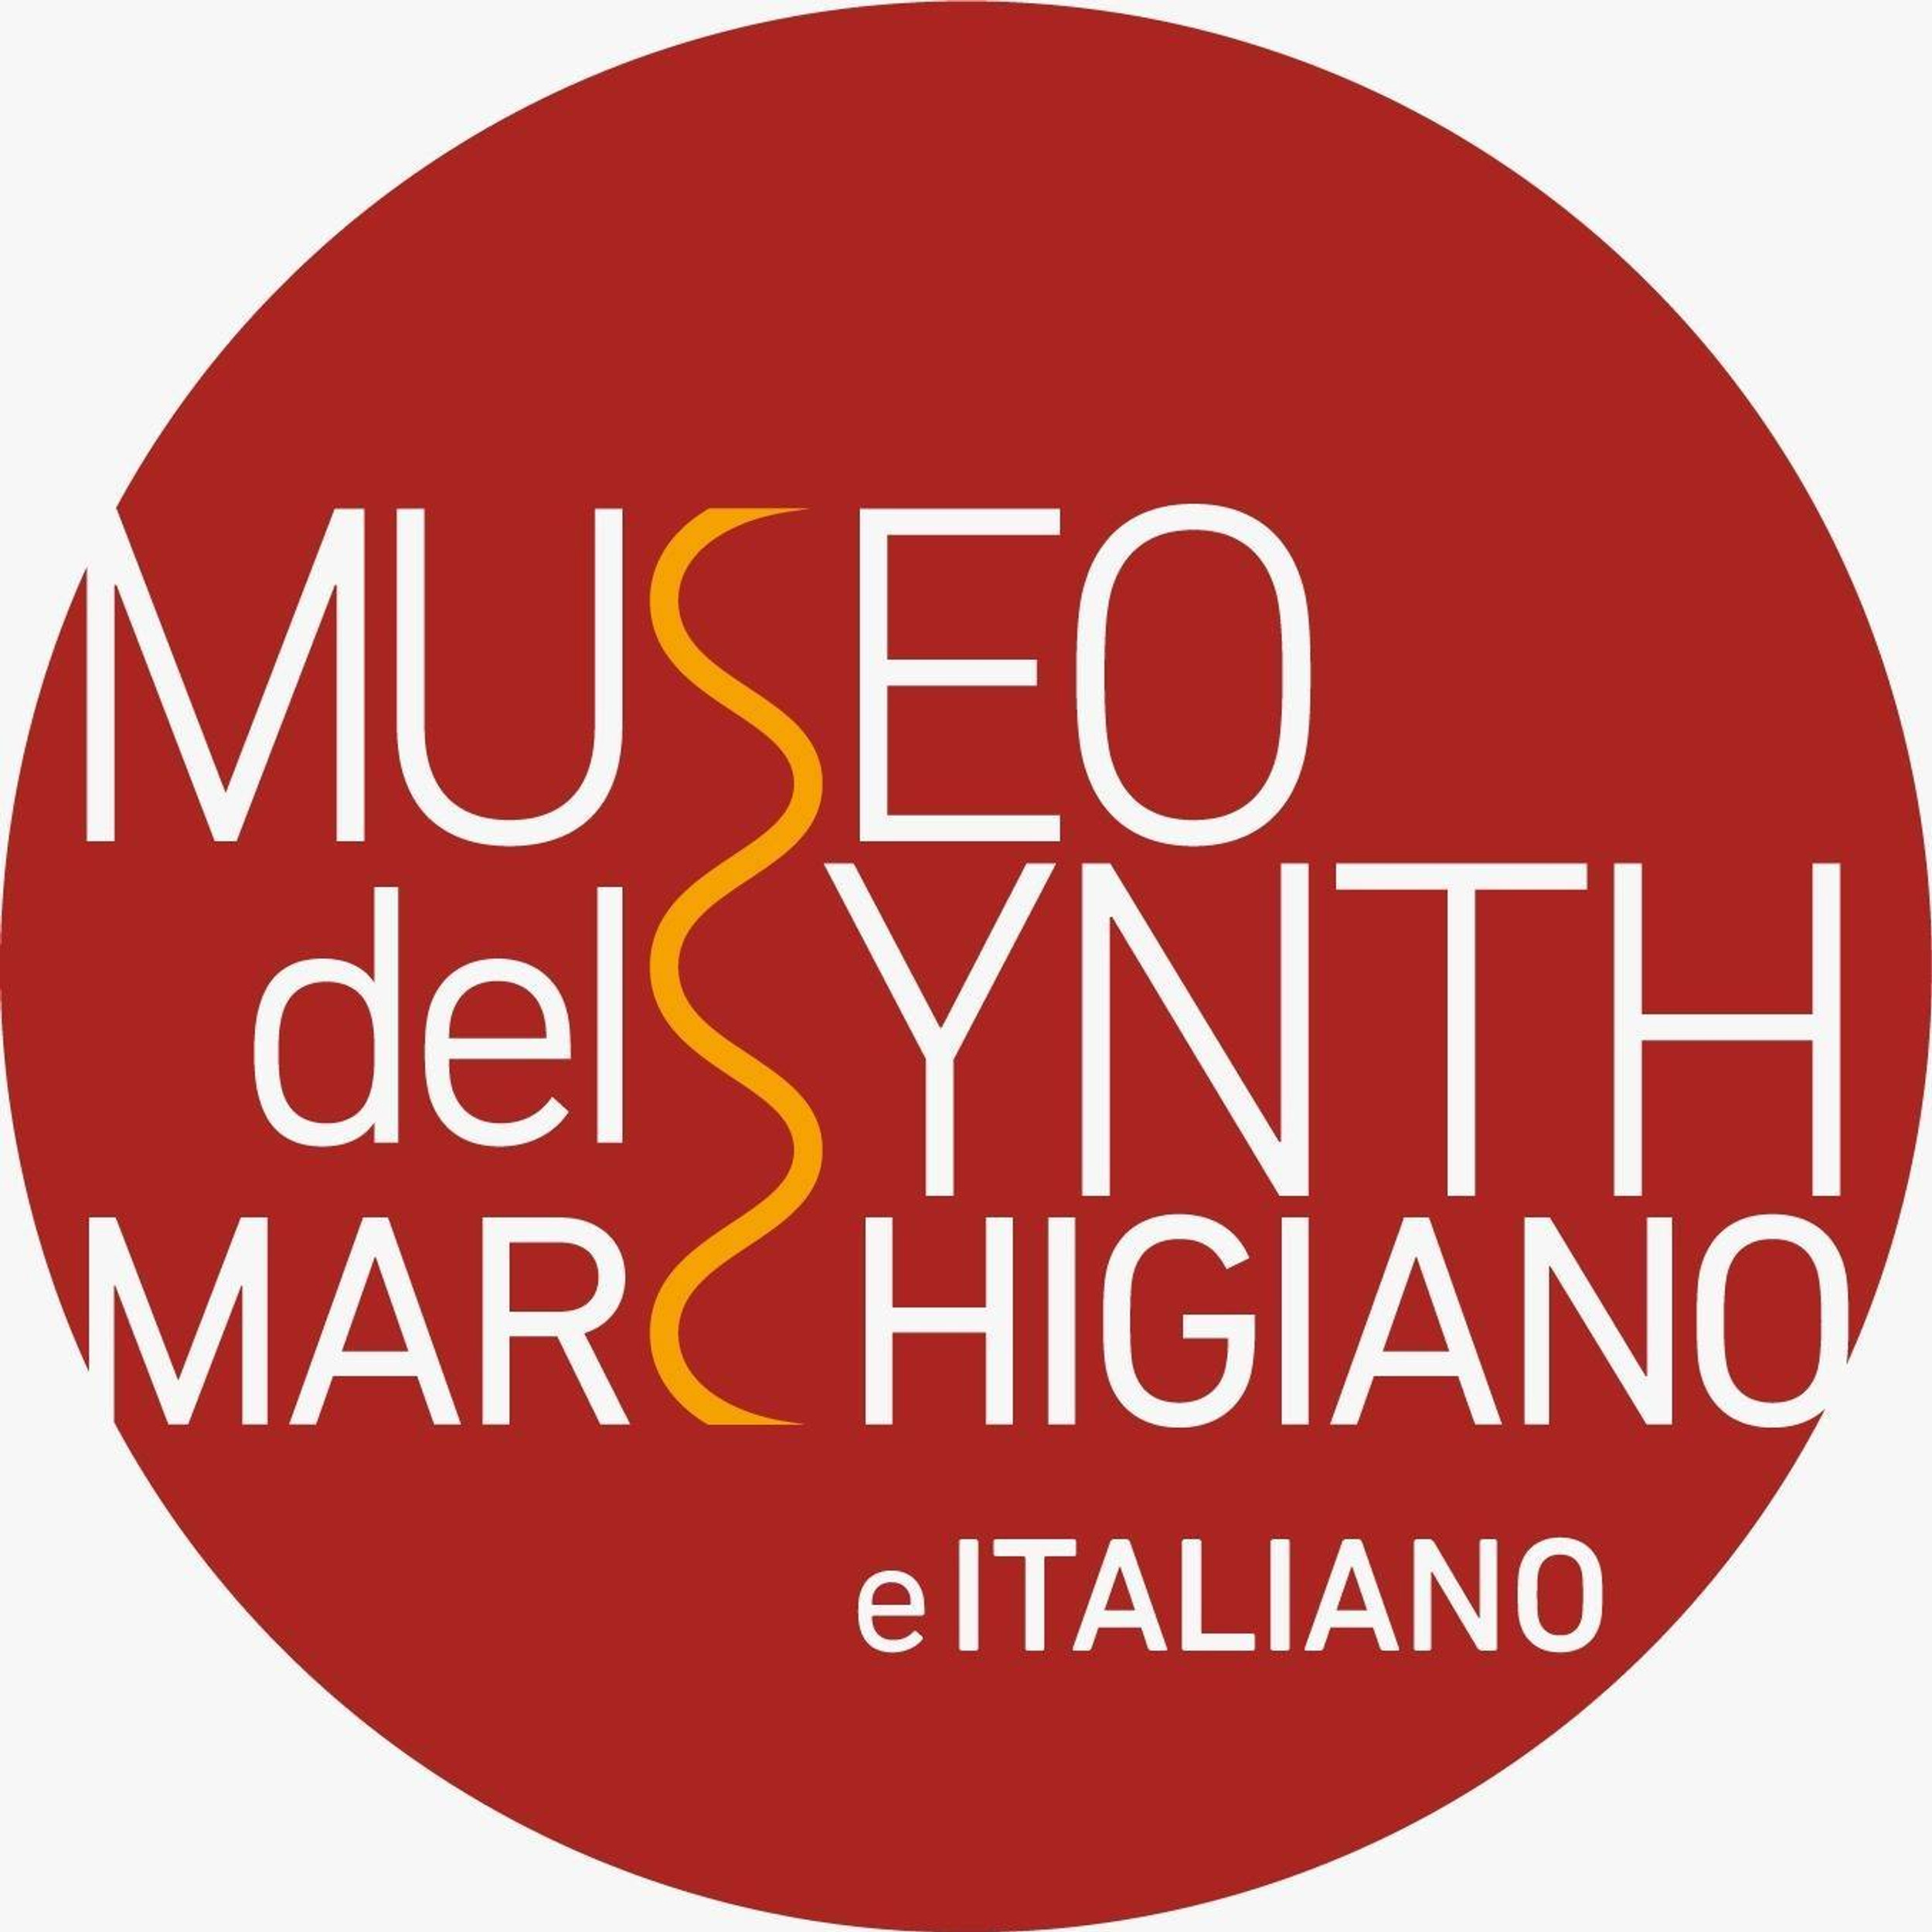 www.museodelsynth.org